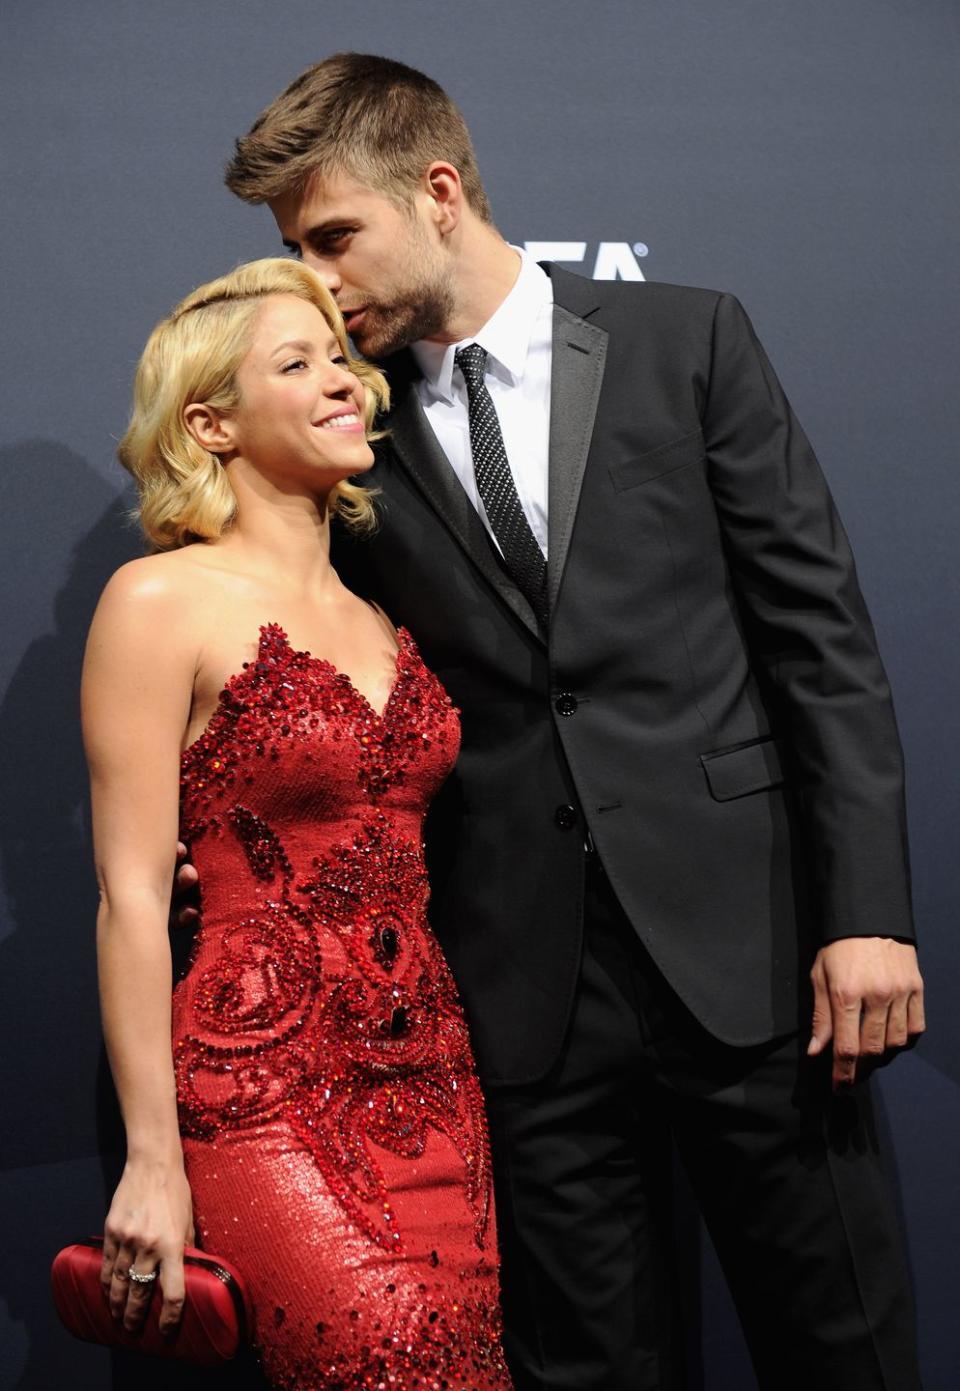 Shakira and Piqué shared a very strong connection.